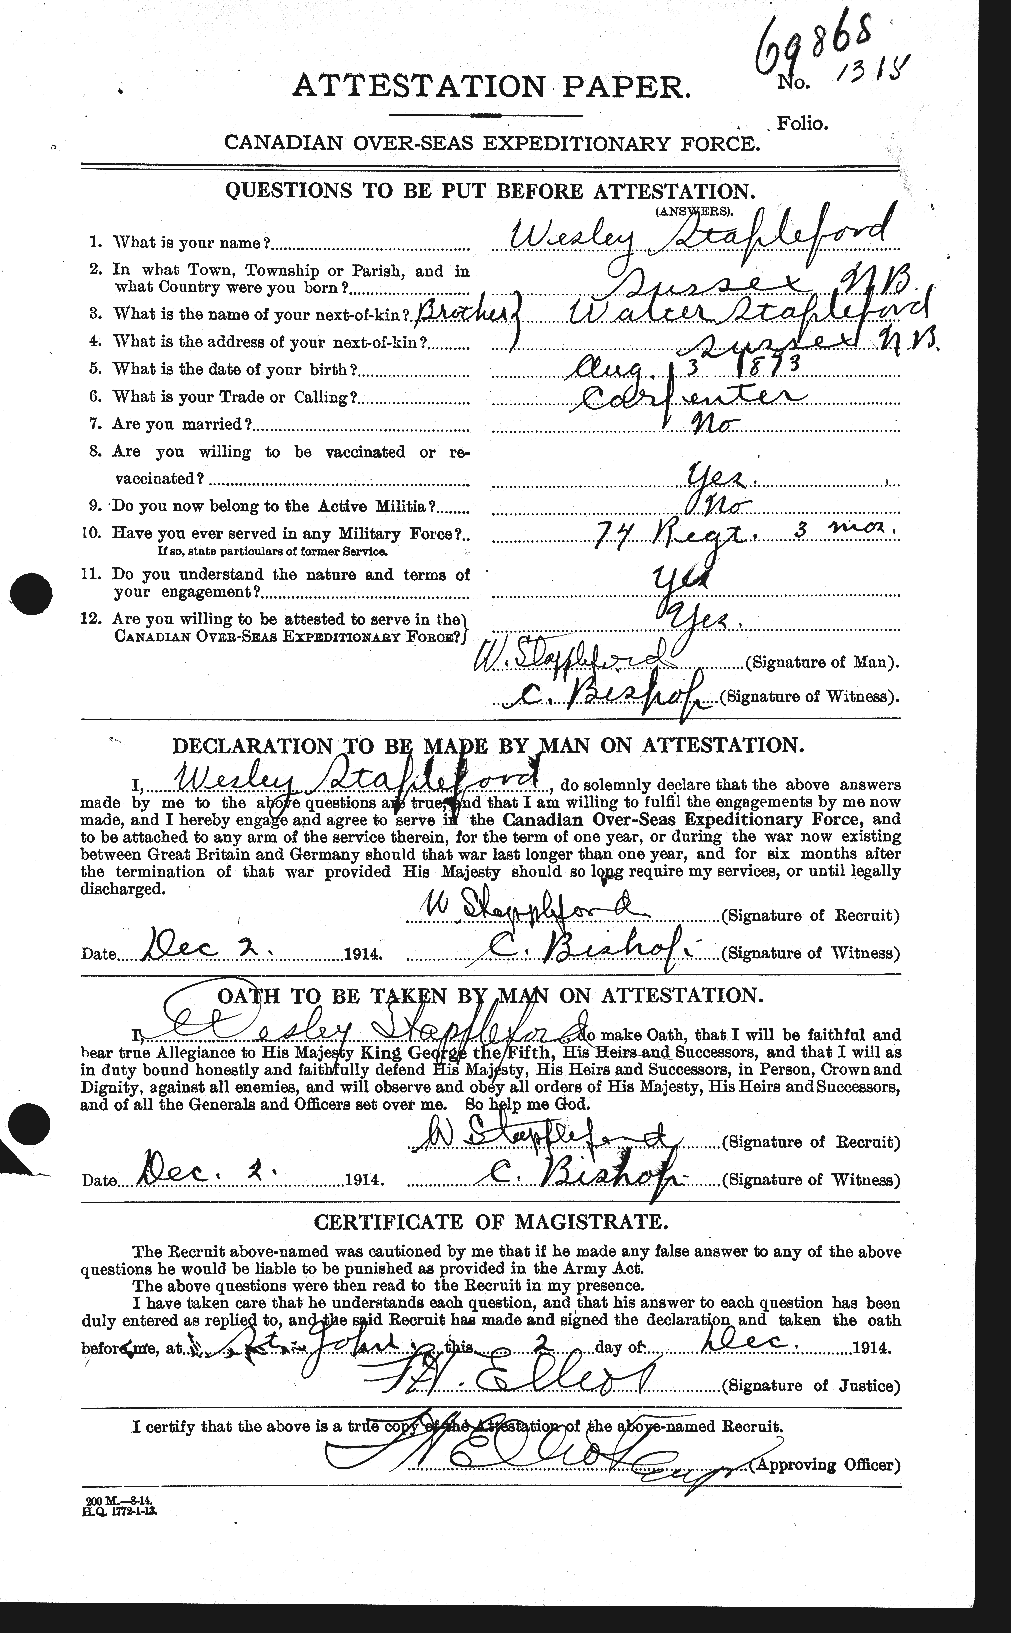 Personnel Records of the First World War - CEF 114264a